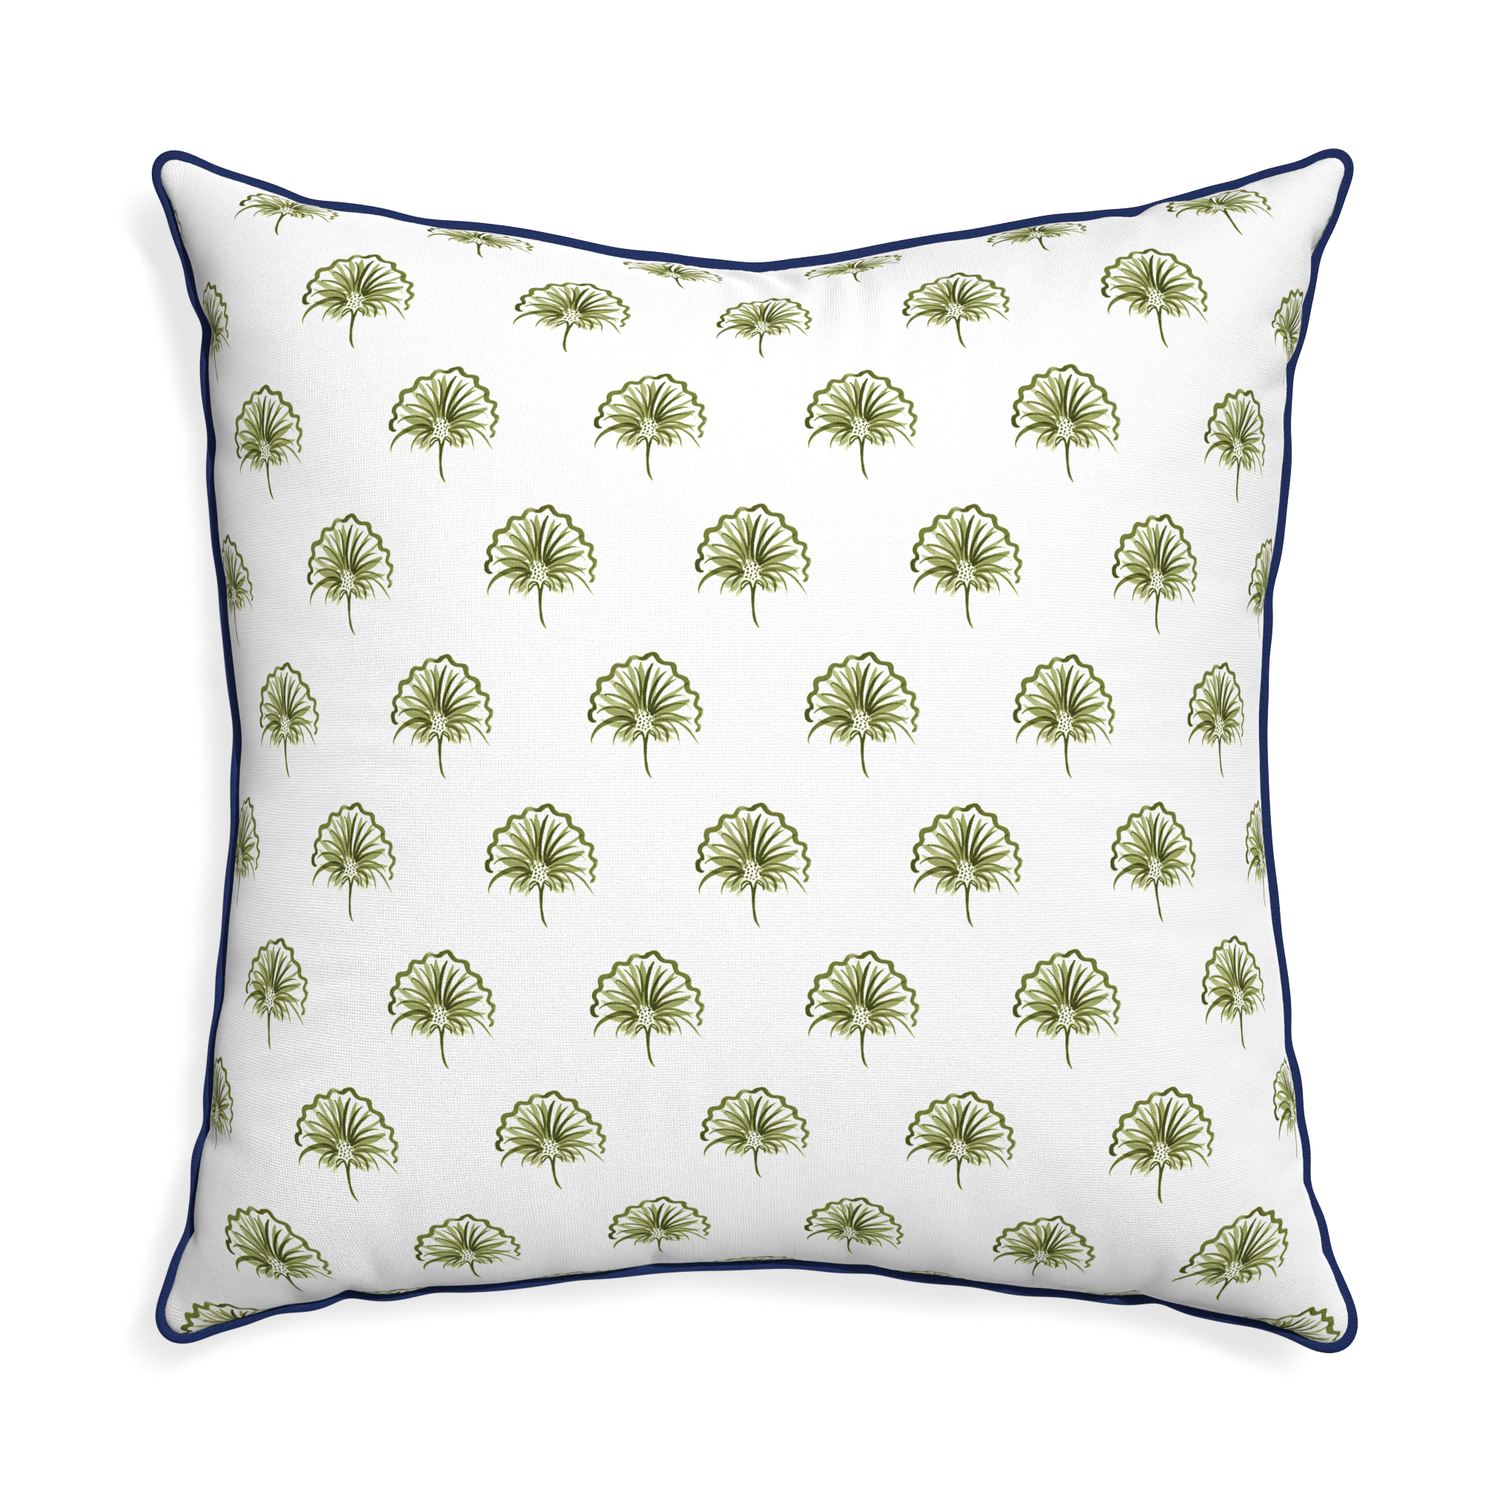 Euro-sham penelope moss custom green floralpillow with midnight piping on white background